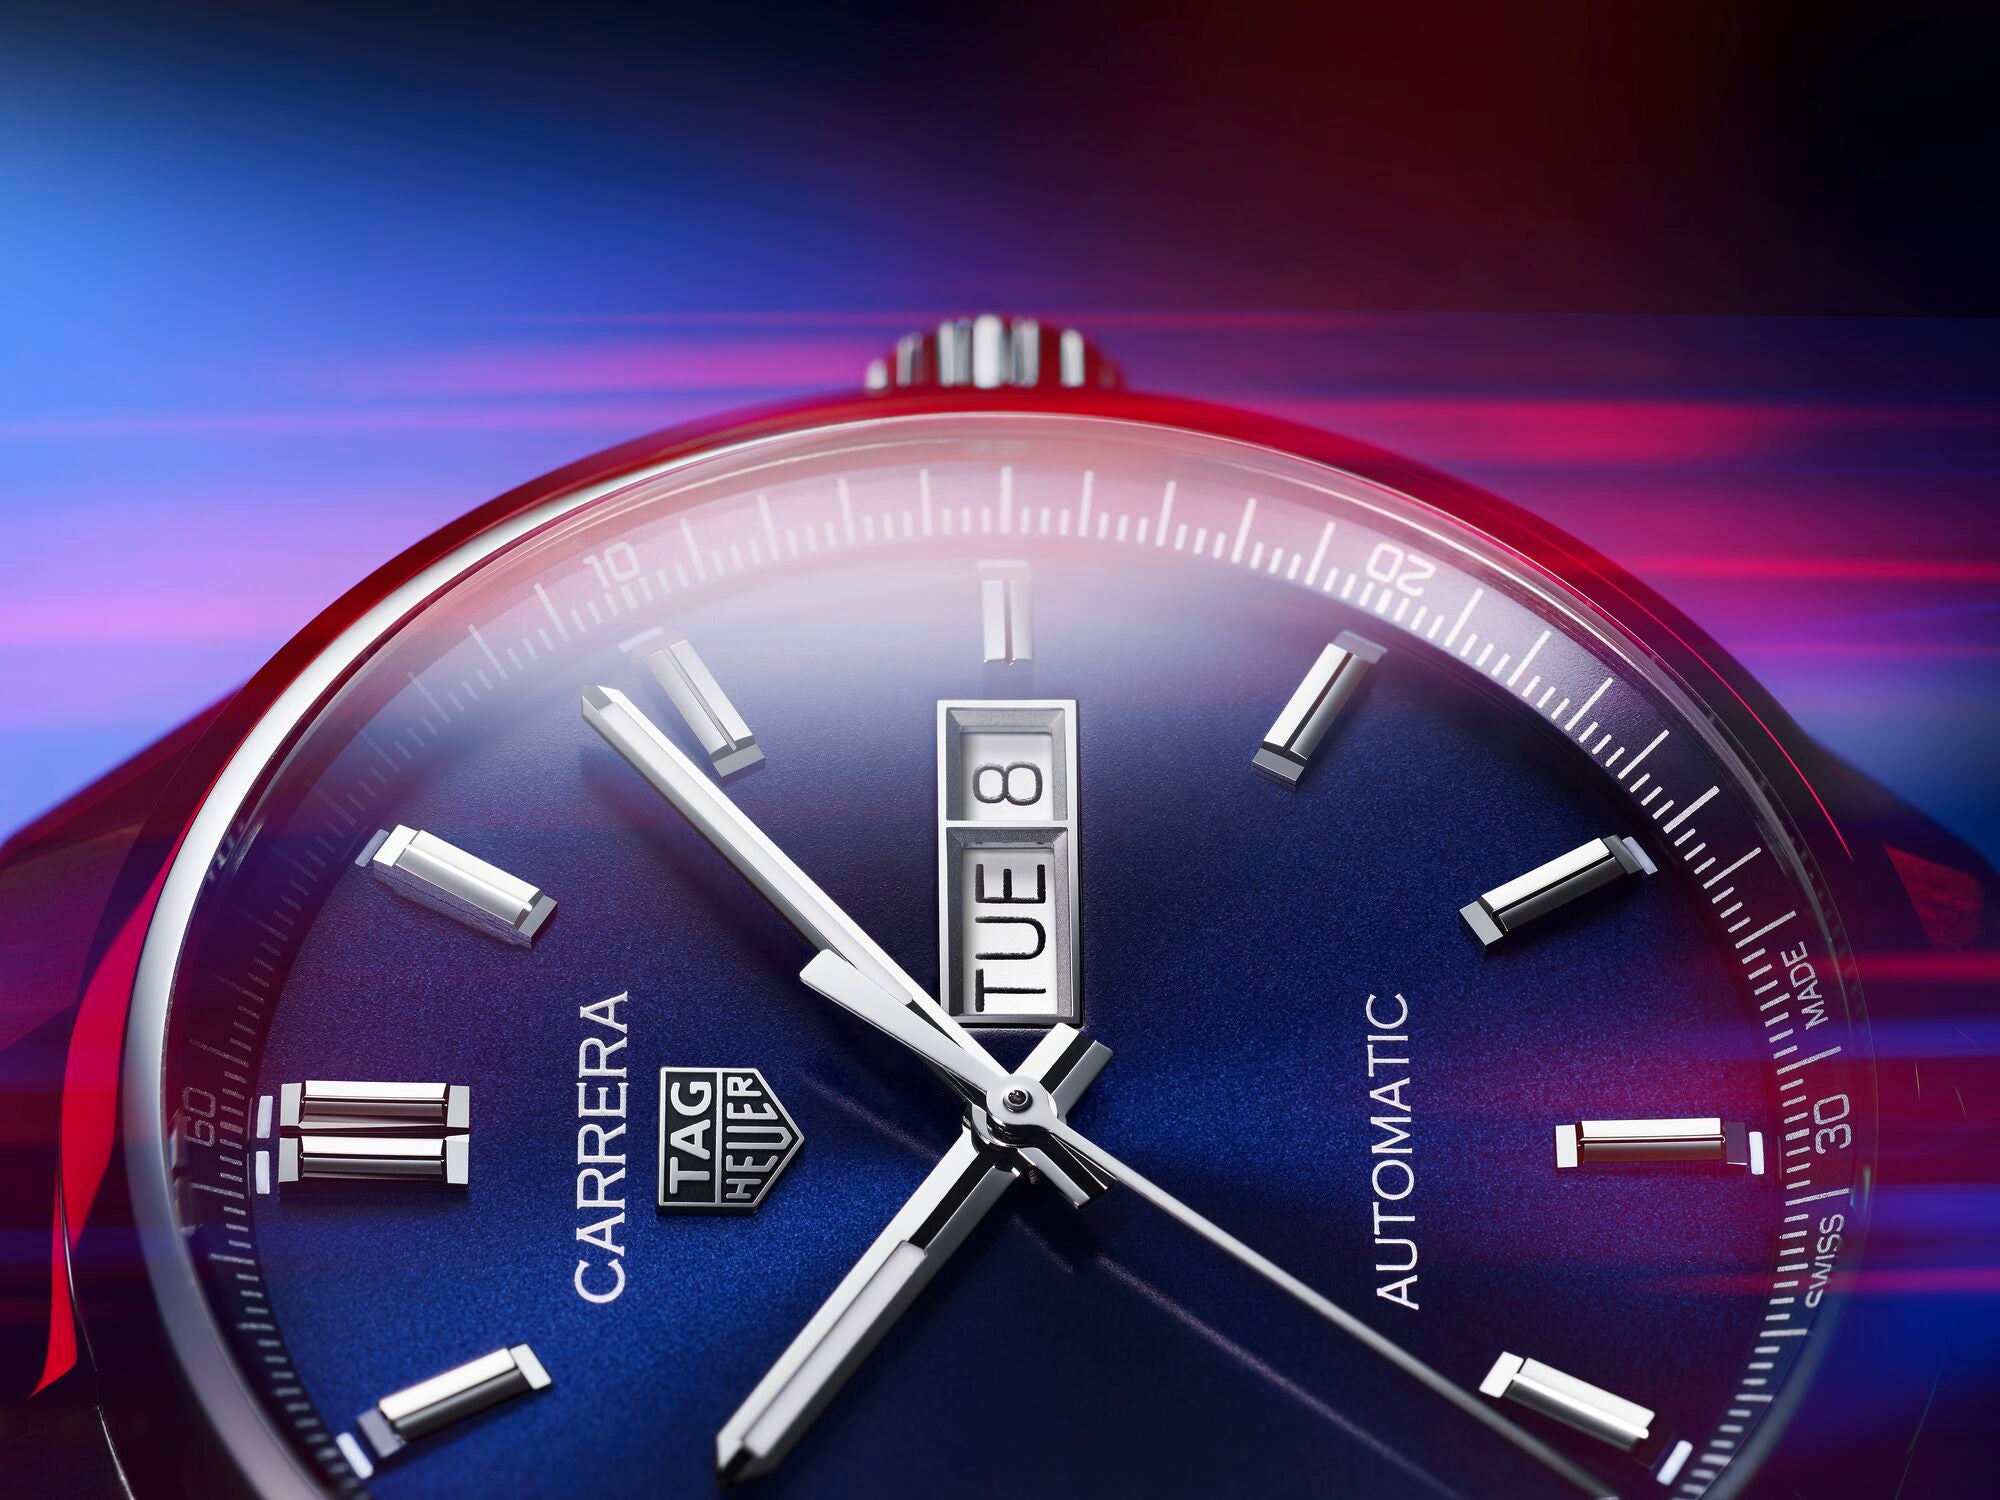 TAG Heuer Carrera Day-Date Automatic (Blue Dial / 41mm)